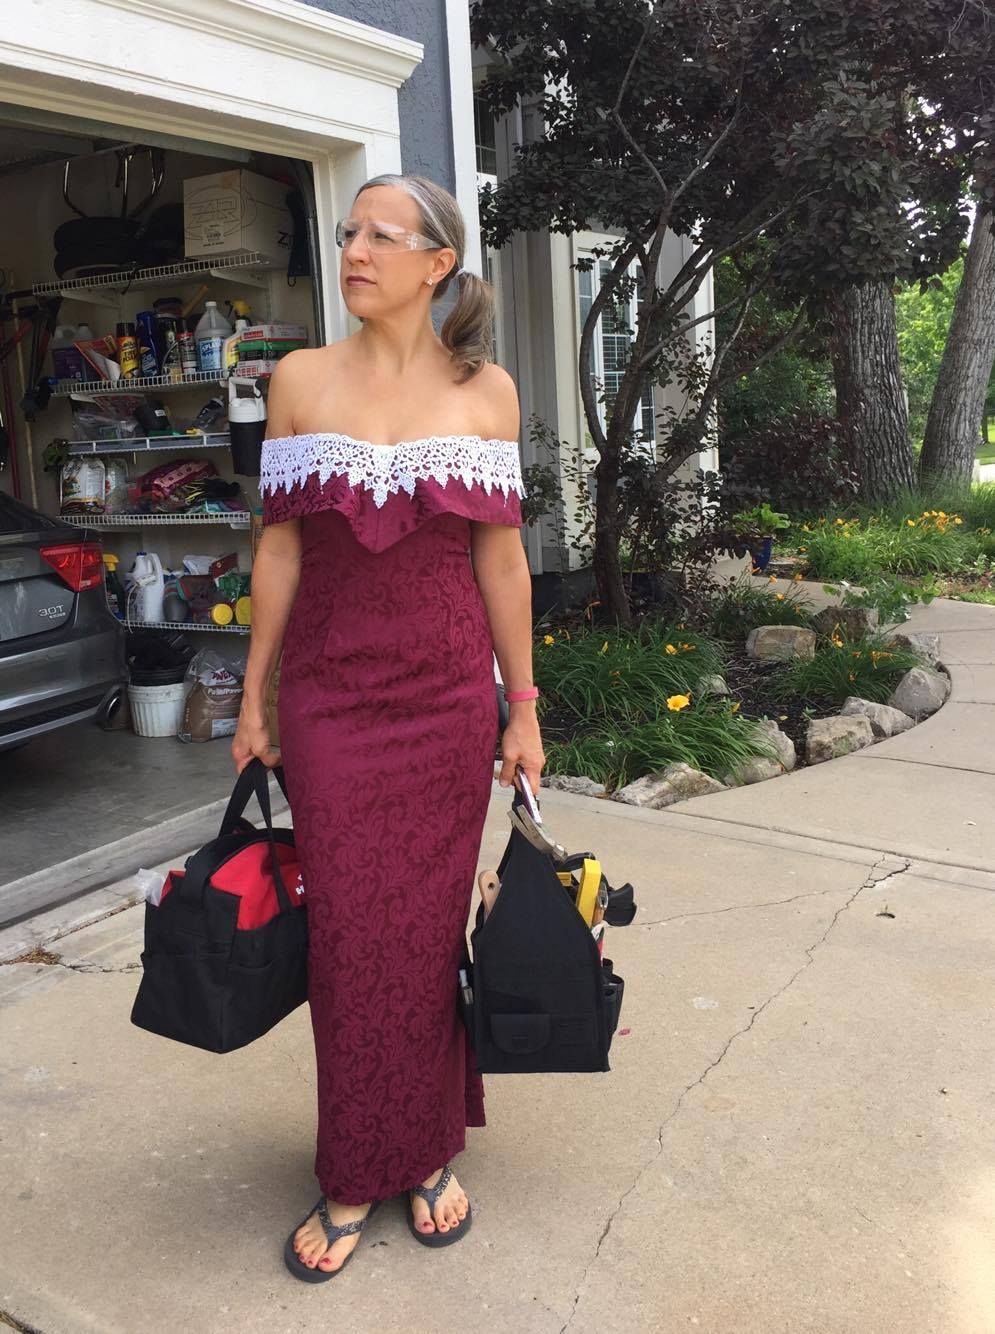 Woman Proves She Still Wears Her 90s Bridesmaid Dress After Bride Apologizes For Them